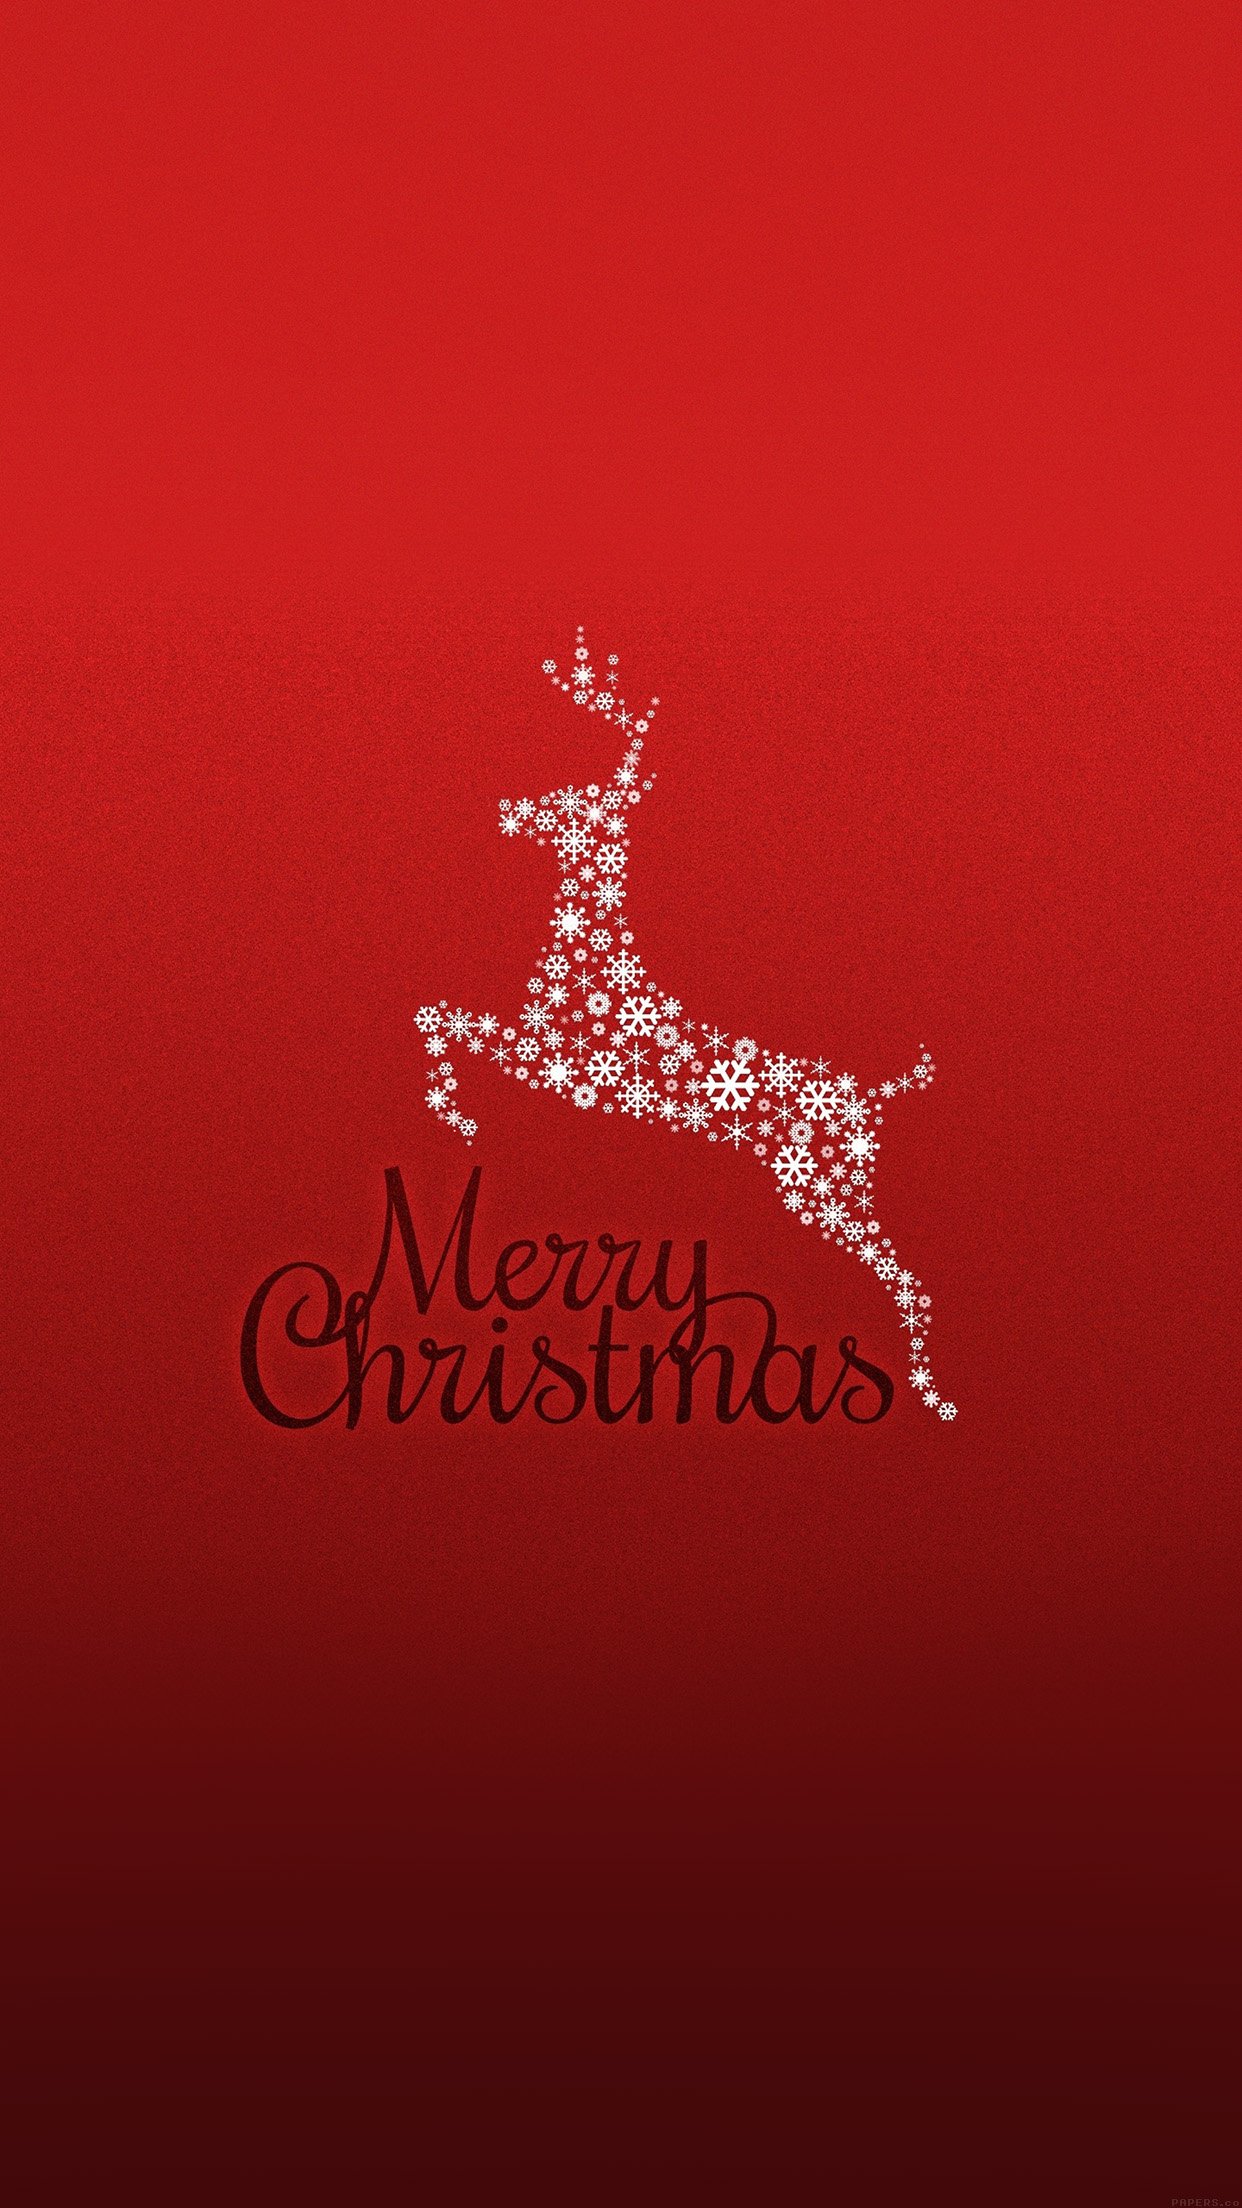 Download Festive Christmas wallpapers for iPhone Zip Download Here